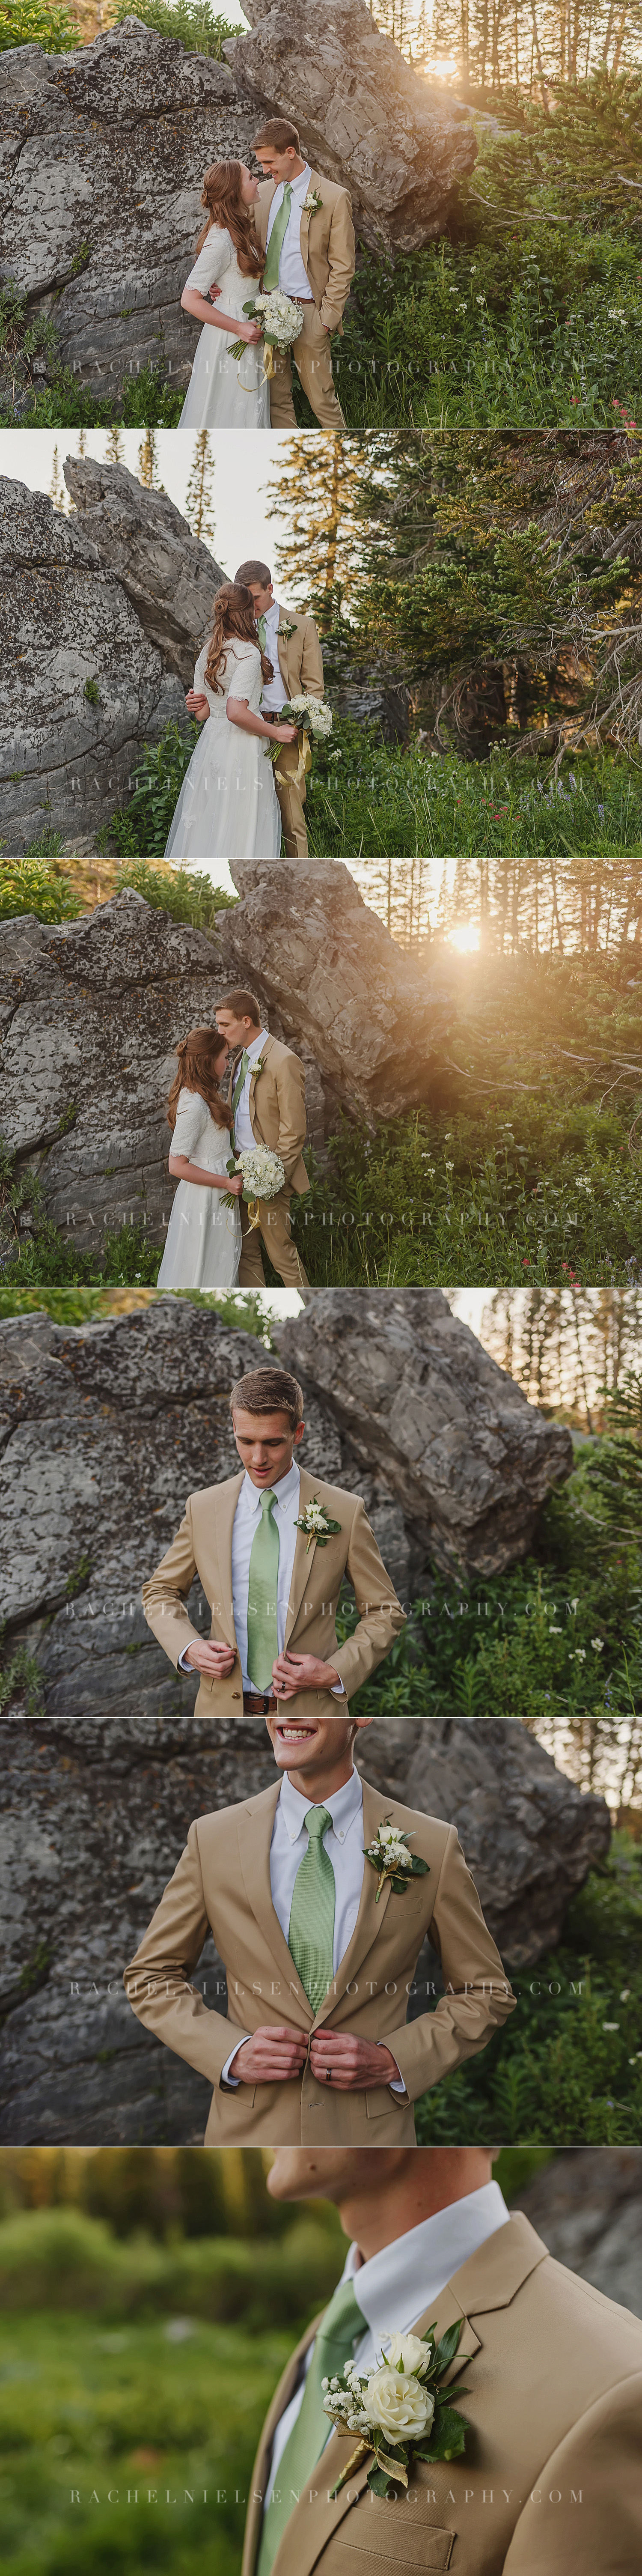 Albion-Basin-Bride-and-Groom-8